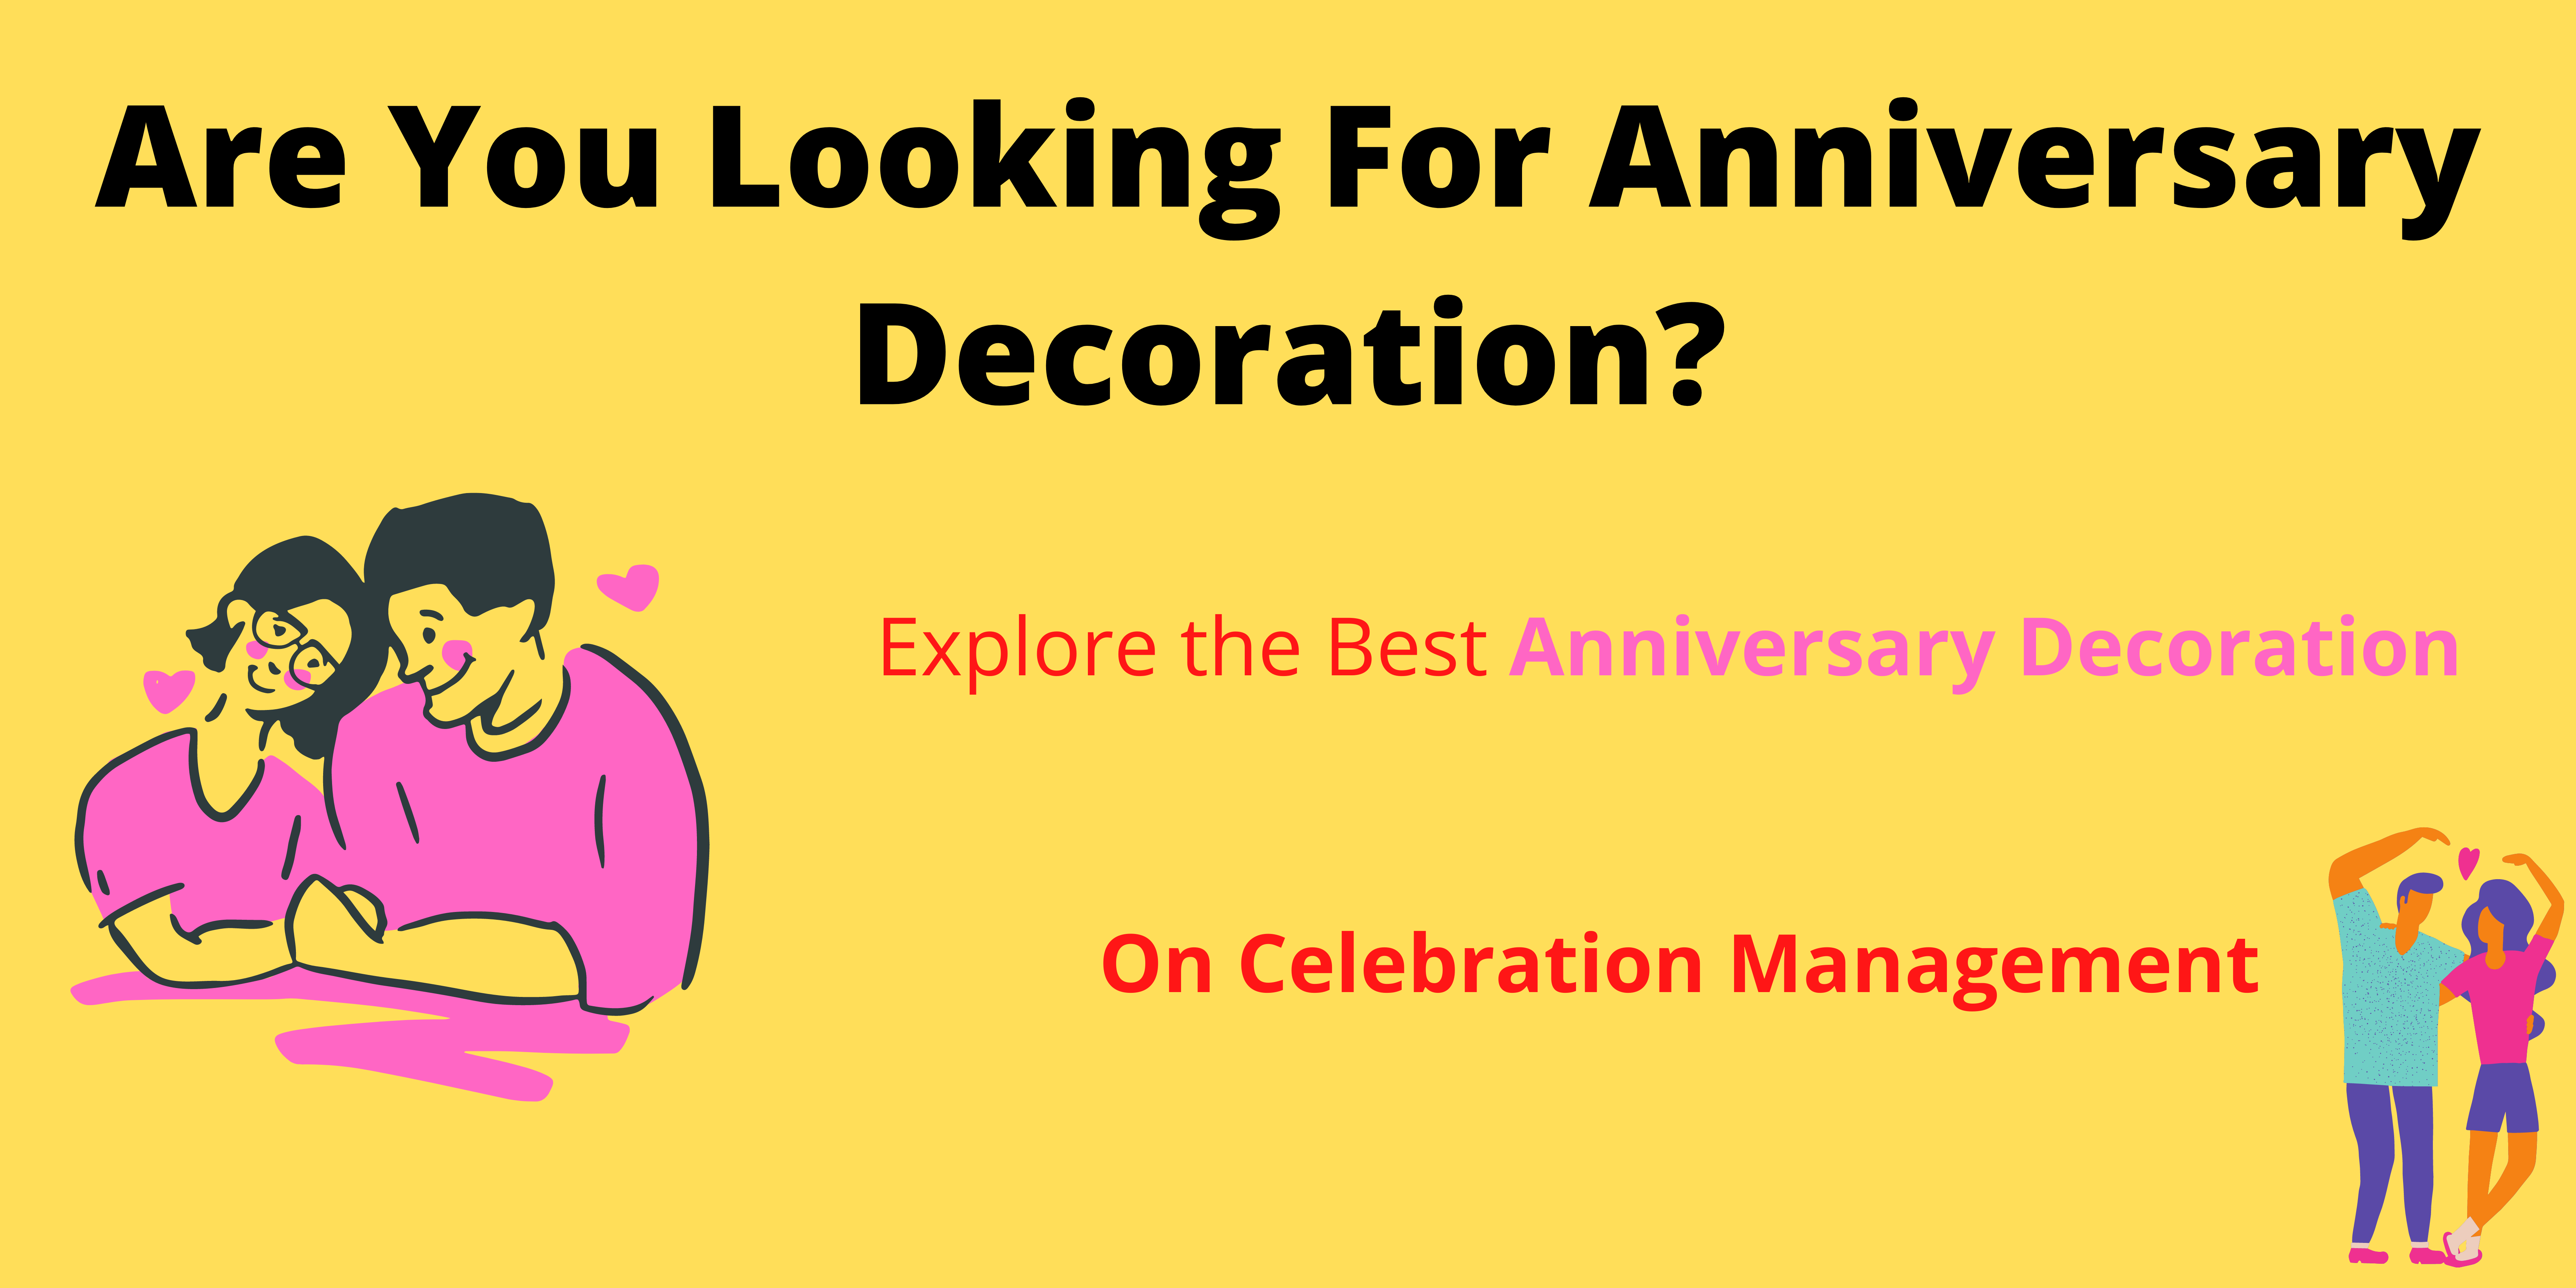 Best Anniversary Decoration Ideas at Home